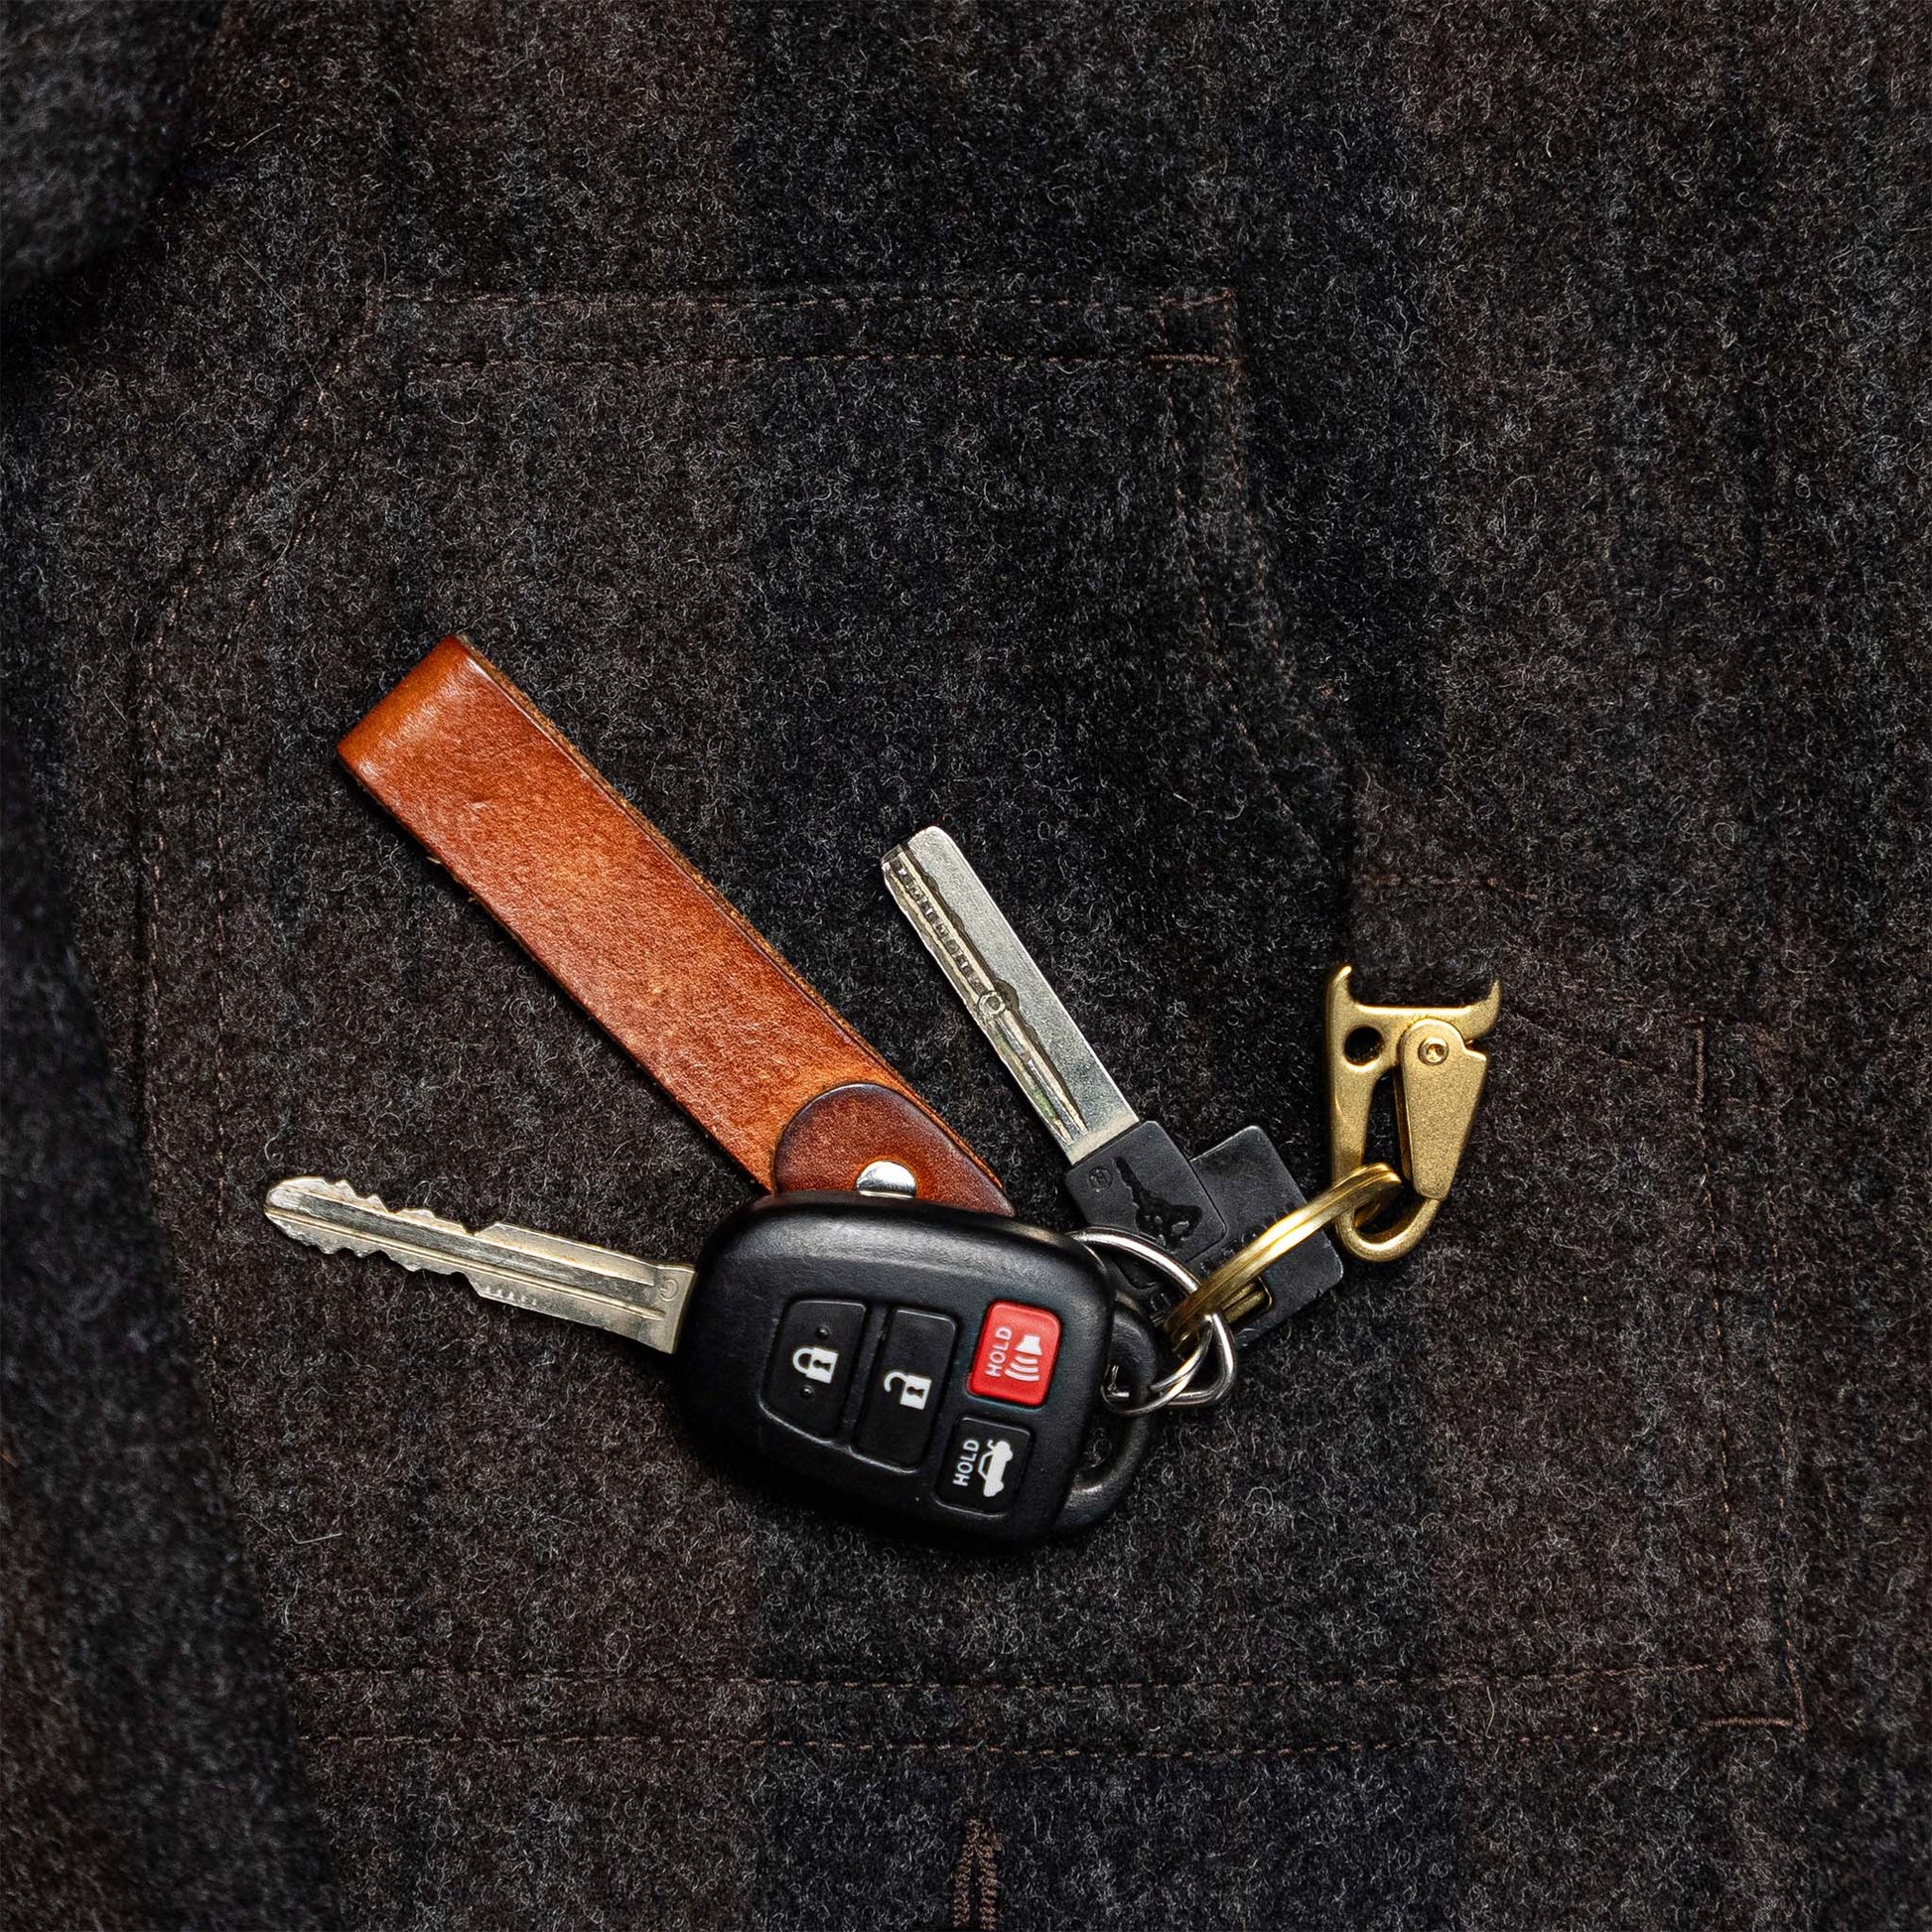 Snap action clip on the Iron Snail Mammoth jacket. Holding keys.